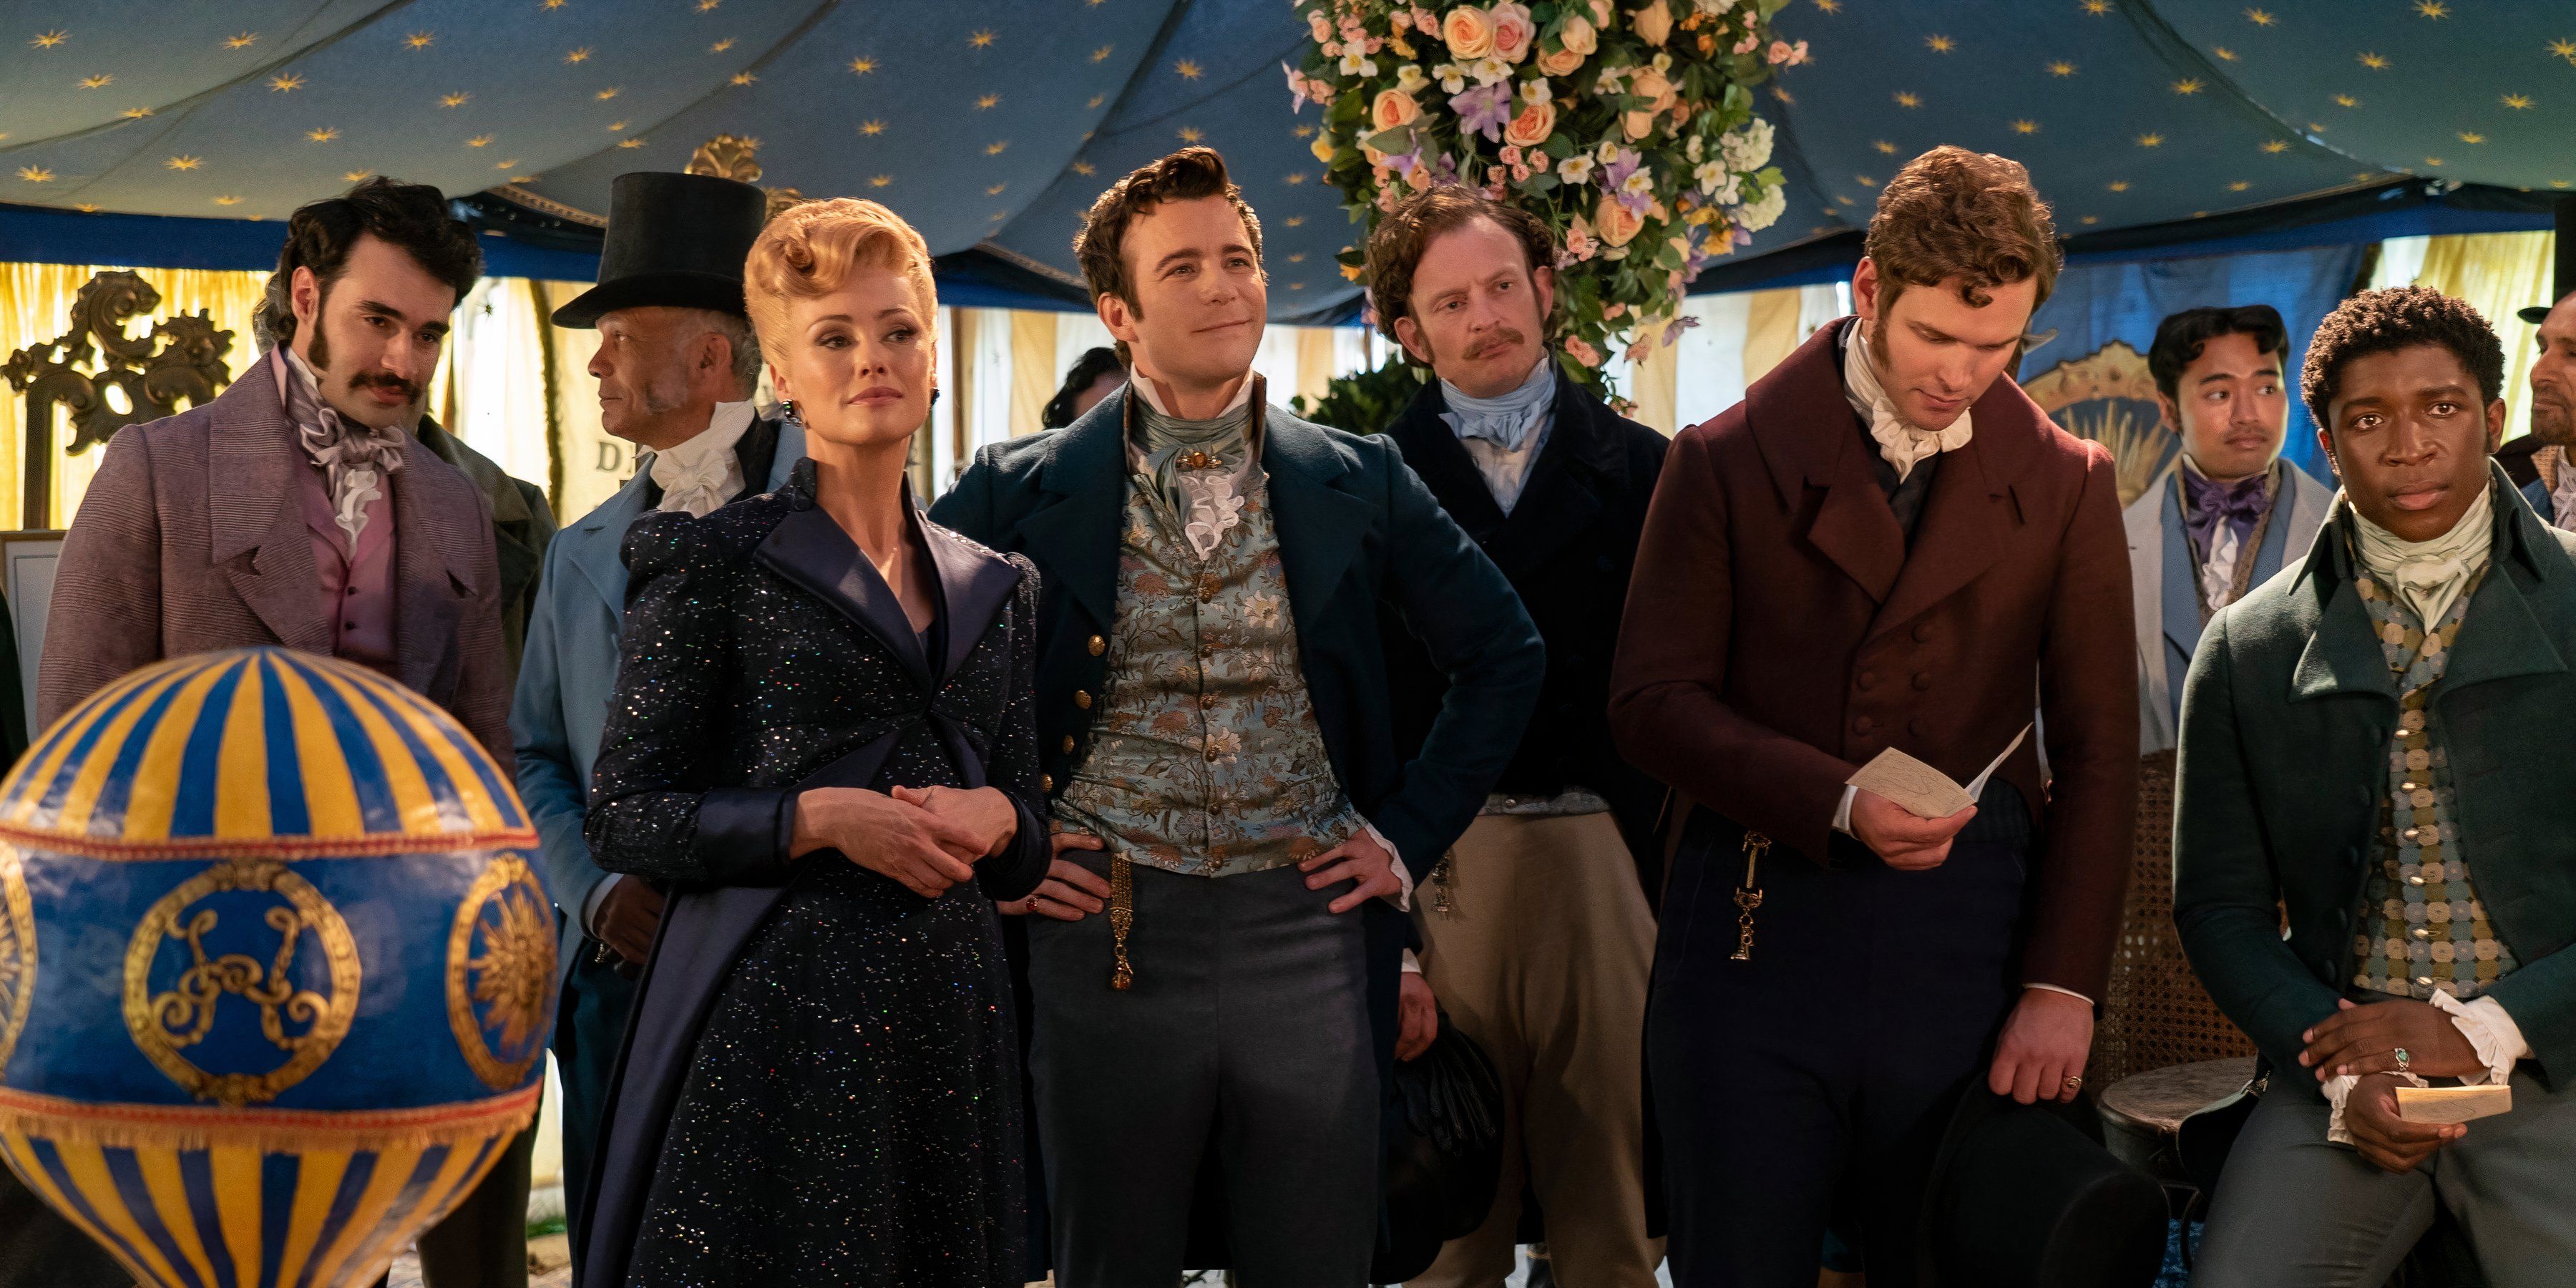 Colin stands with Lady Tilly Arnold and other characters in Bridgerton season 3 still